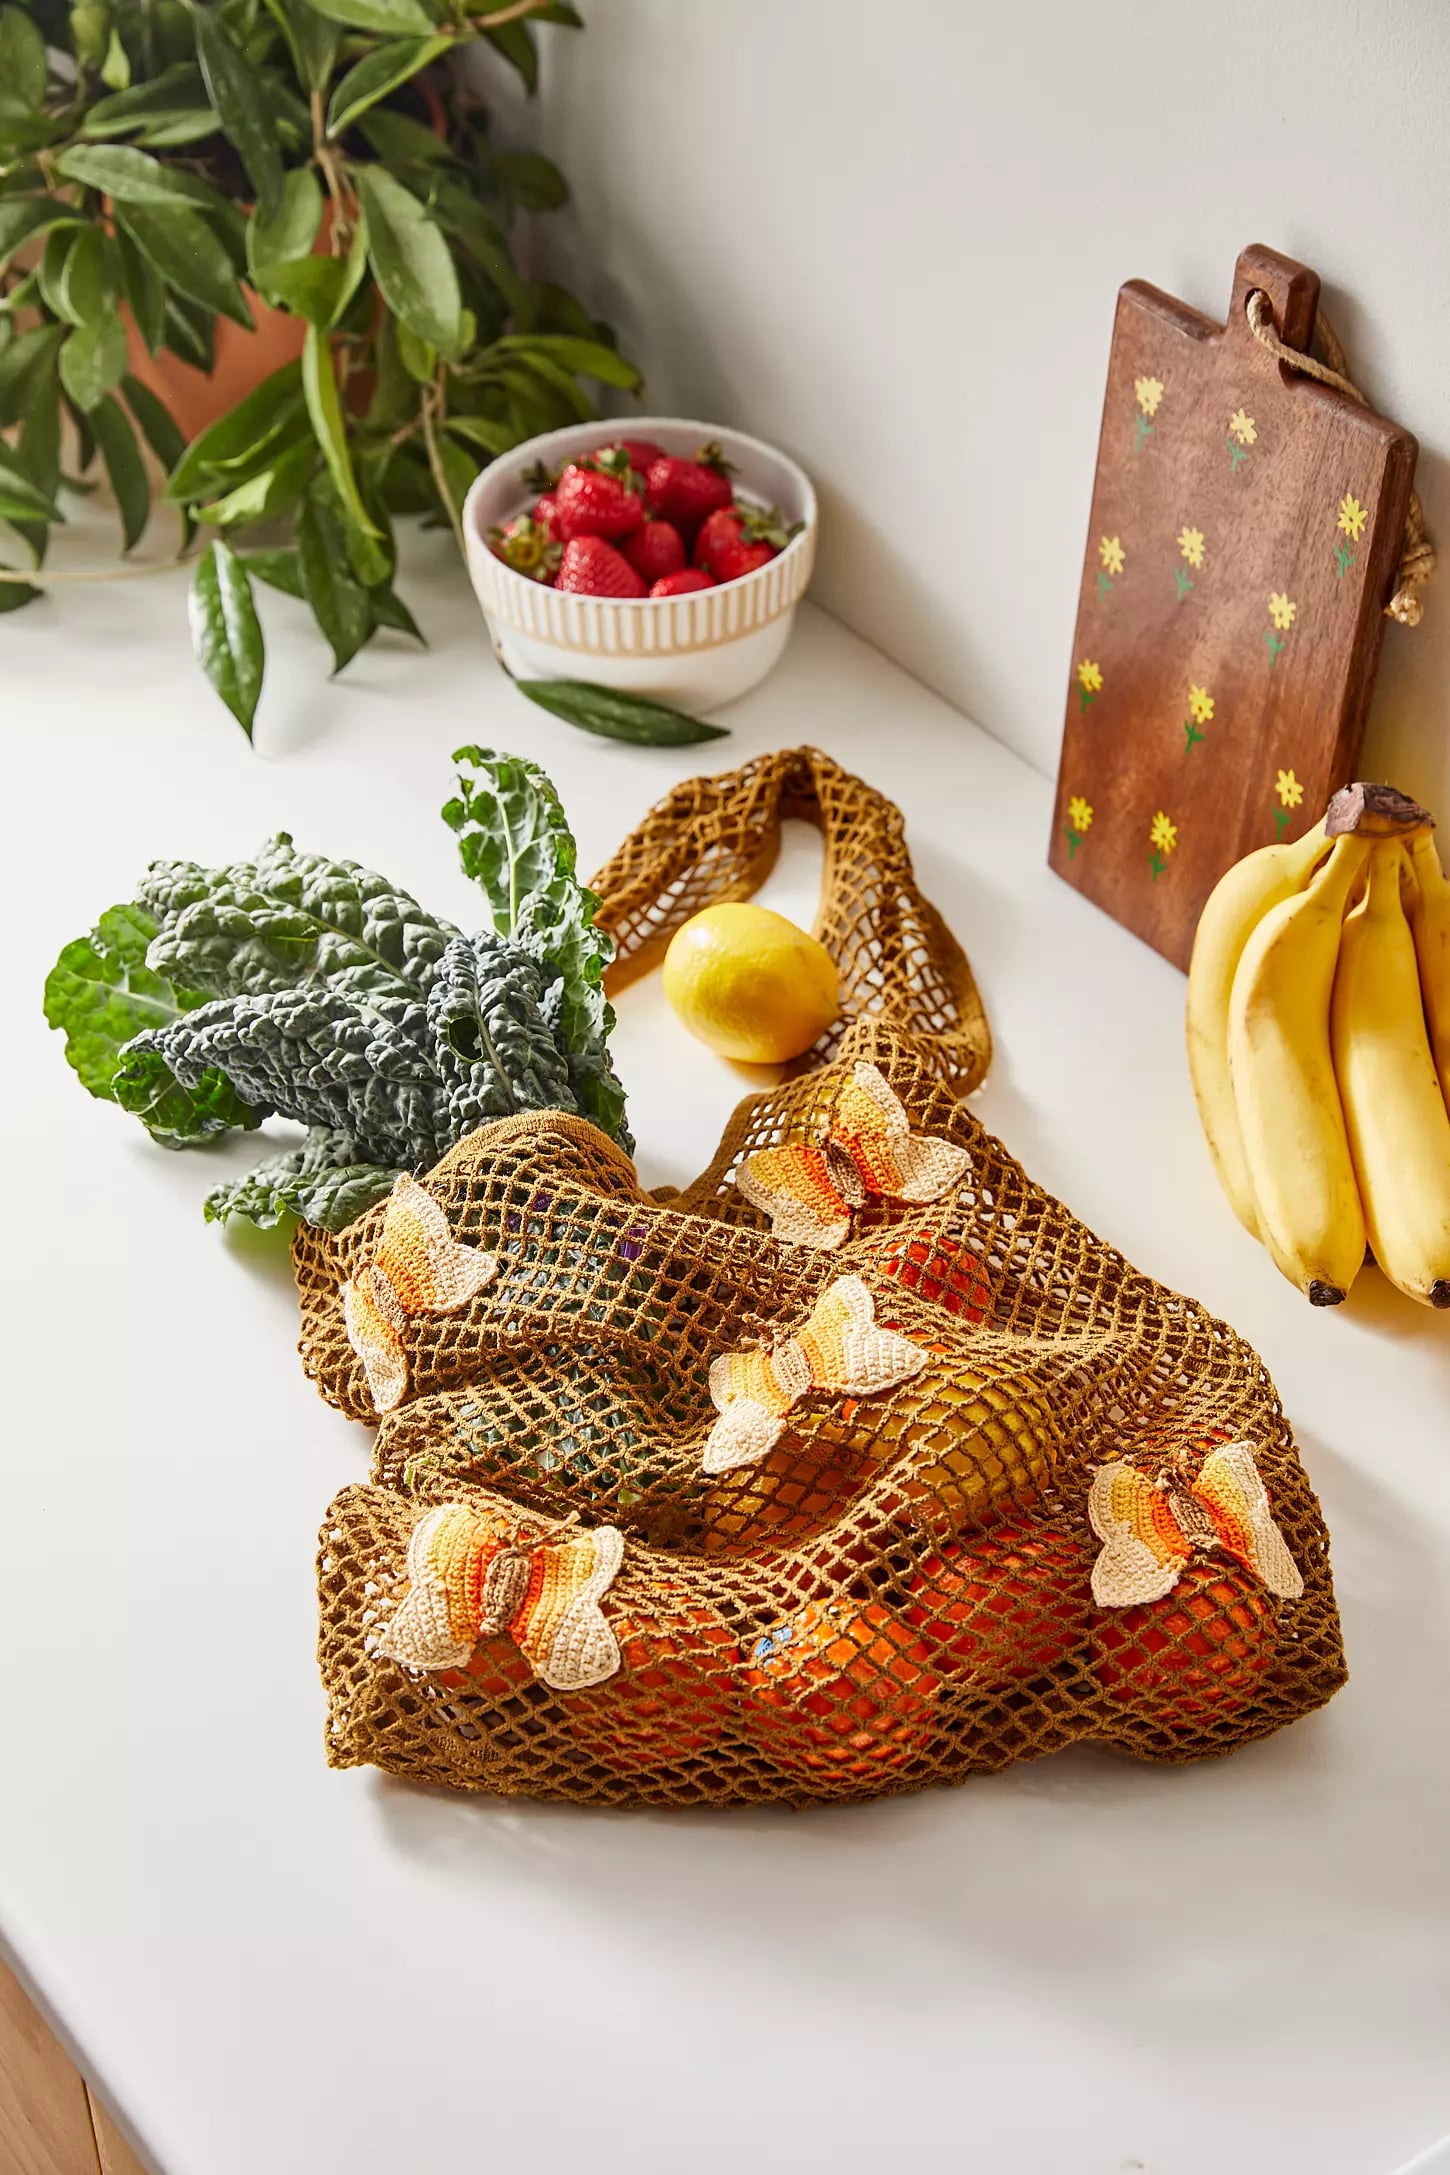 Urban Outfitters Sale on Cute and Affordable Kitchen Gifts